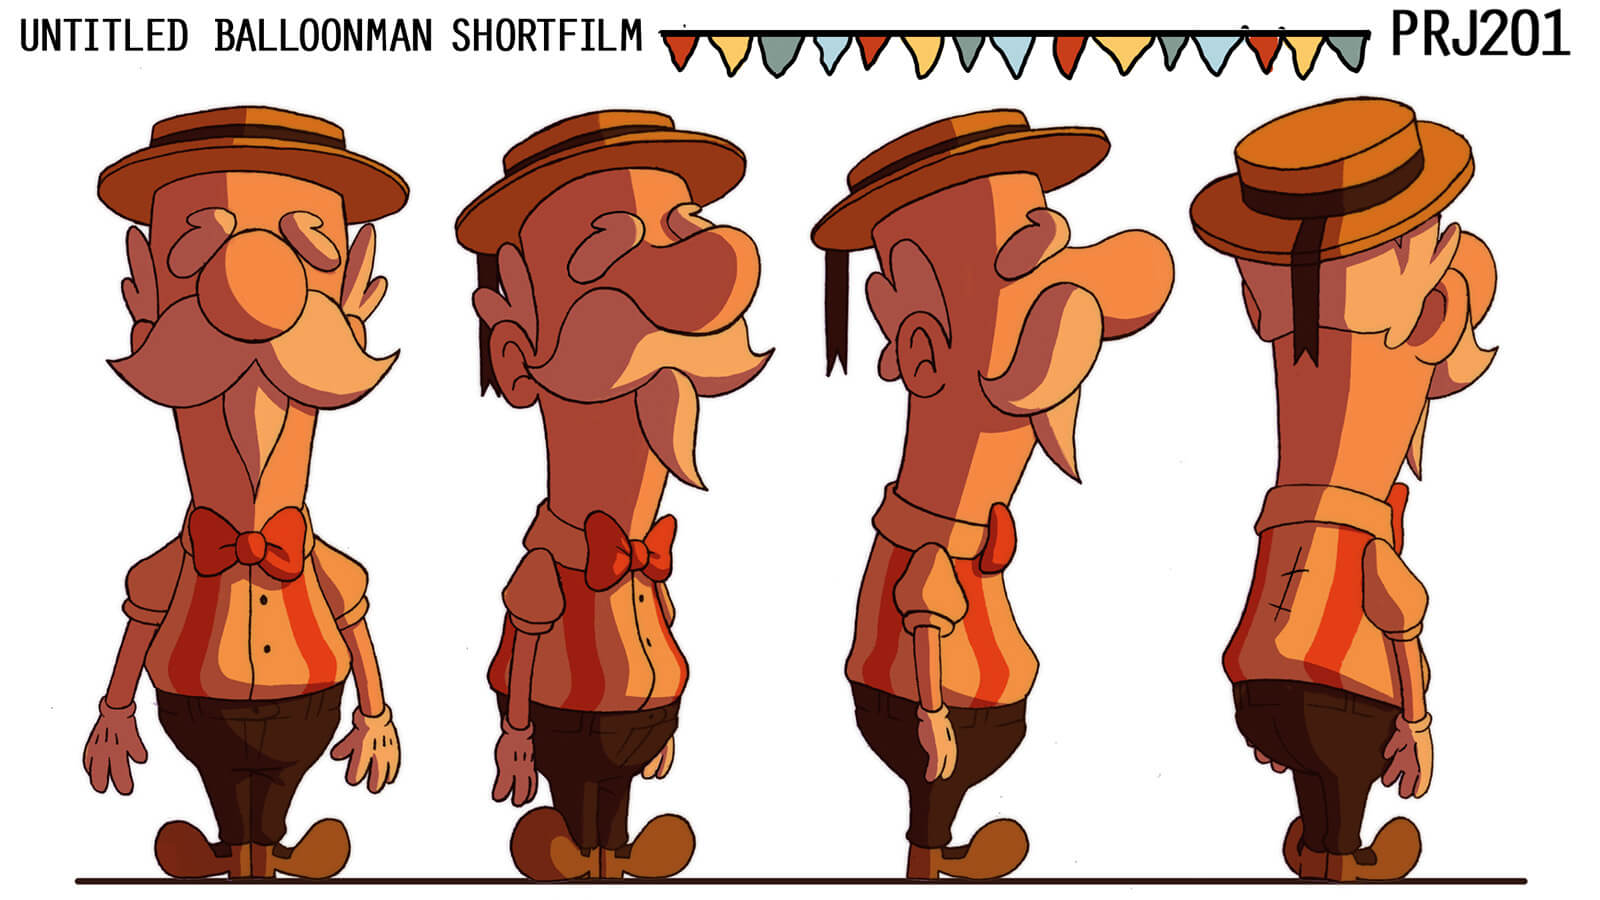 Concept artwork of the old carnival balloonman for use in sunset settings